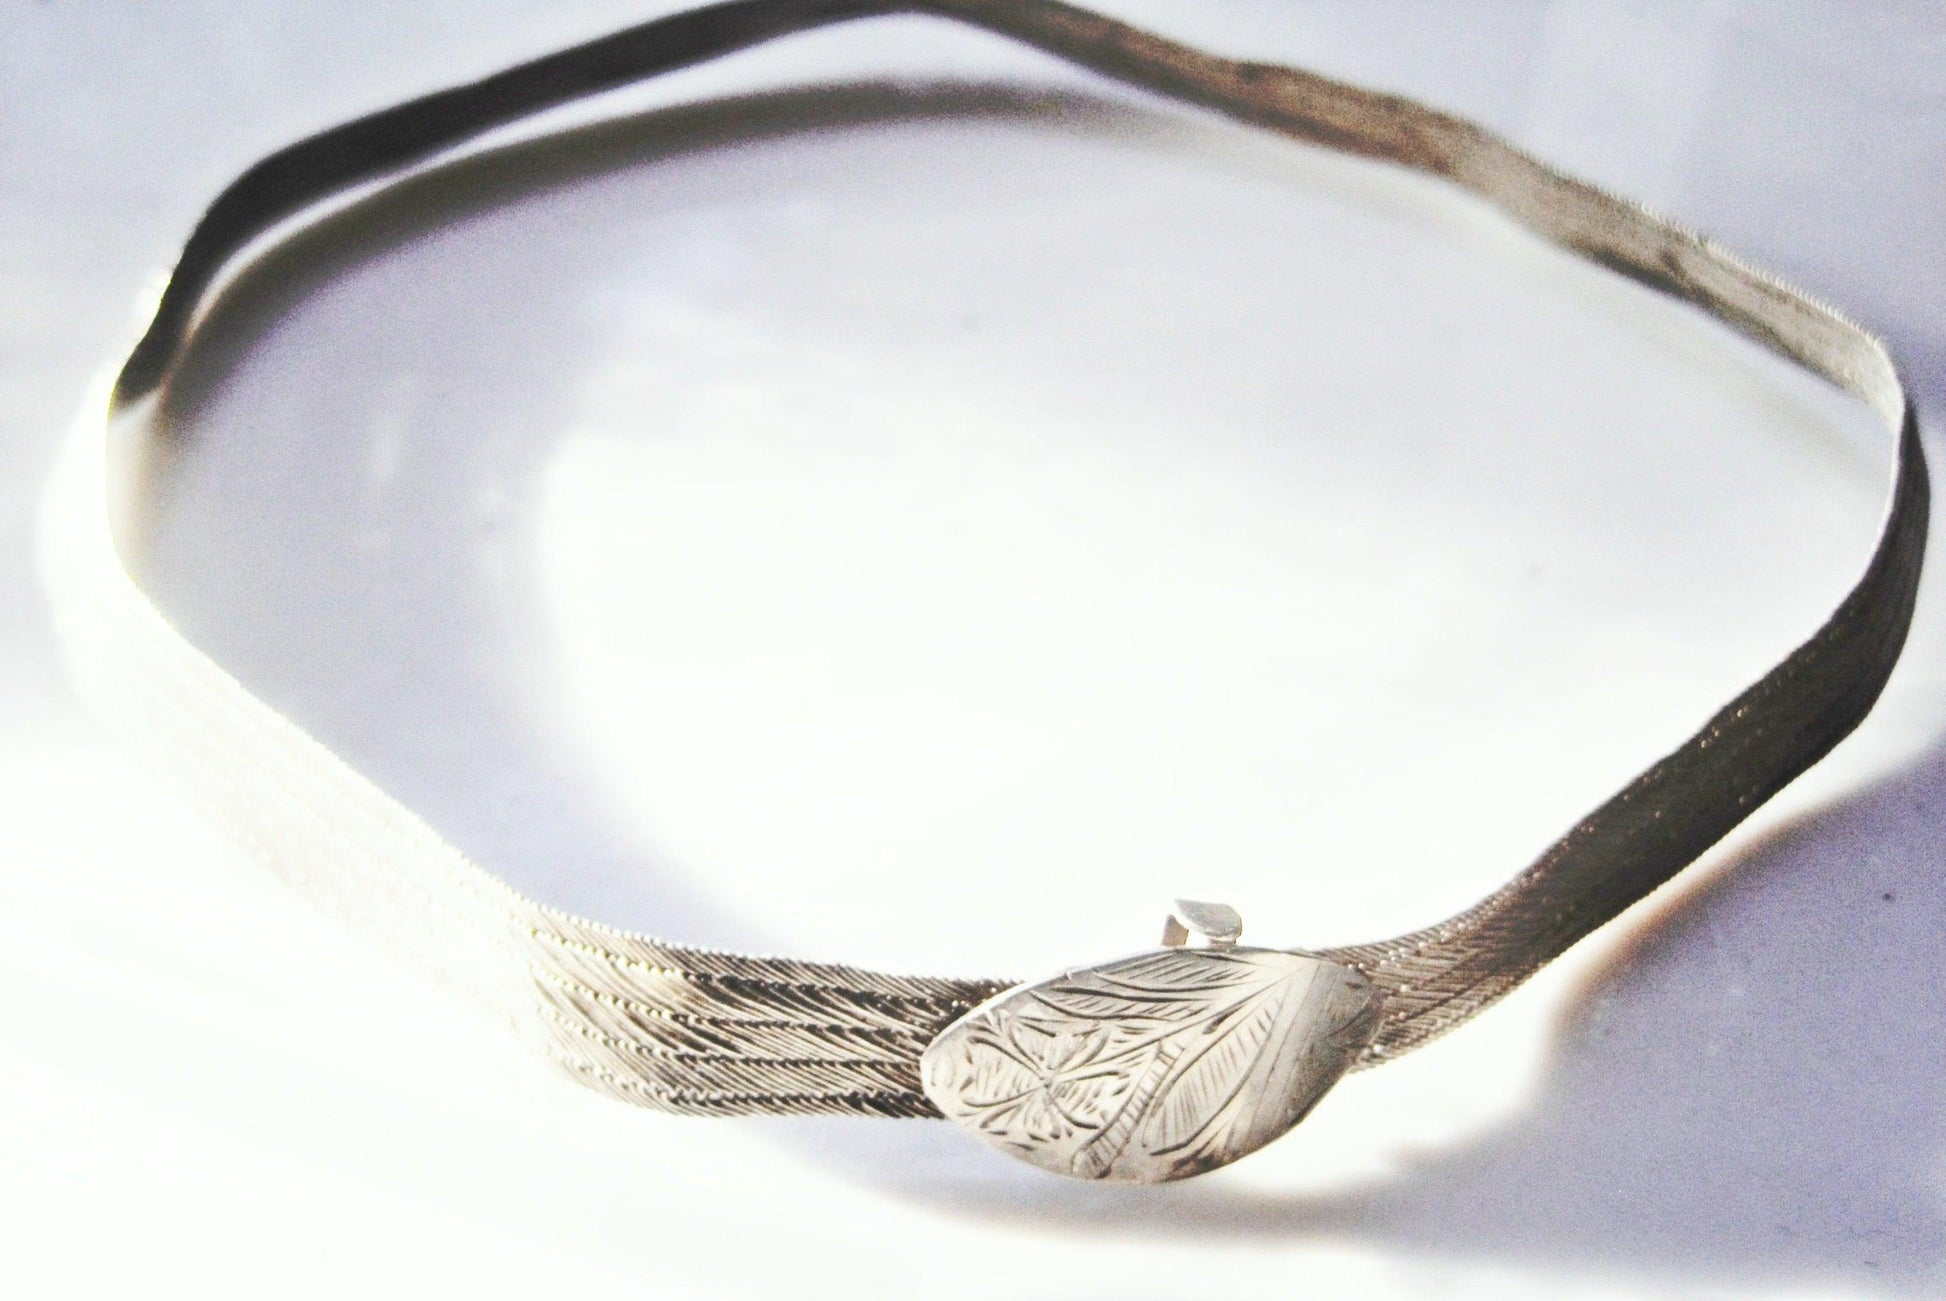 Vintage Hand Woven Silver Choker Necklace from Trabzon - Anteeka